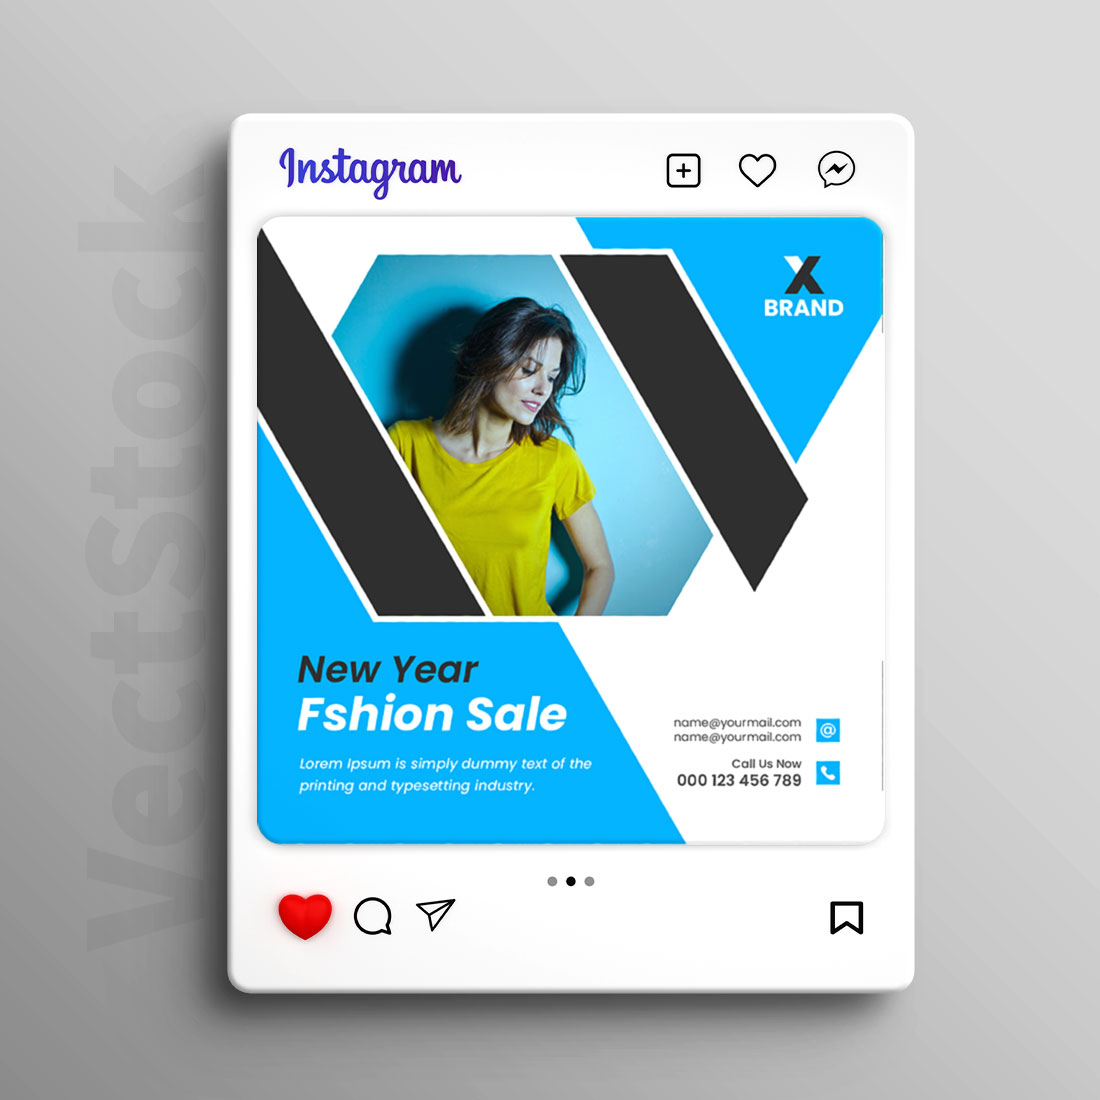 Yew year fashion sale social media Instagram post and banner template design cover image.